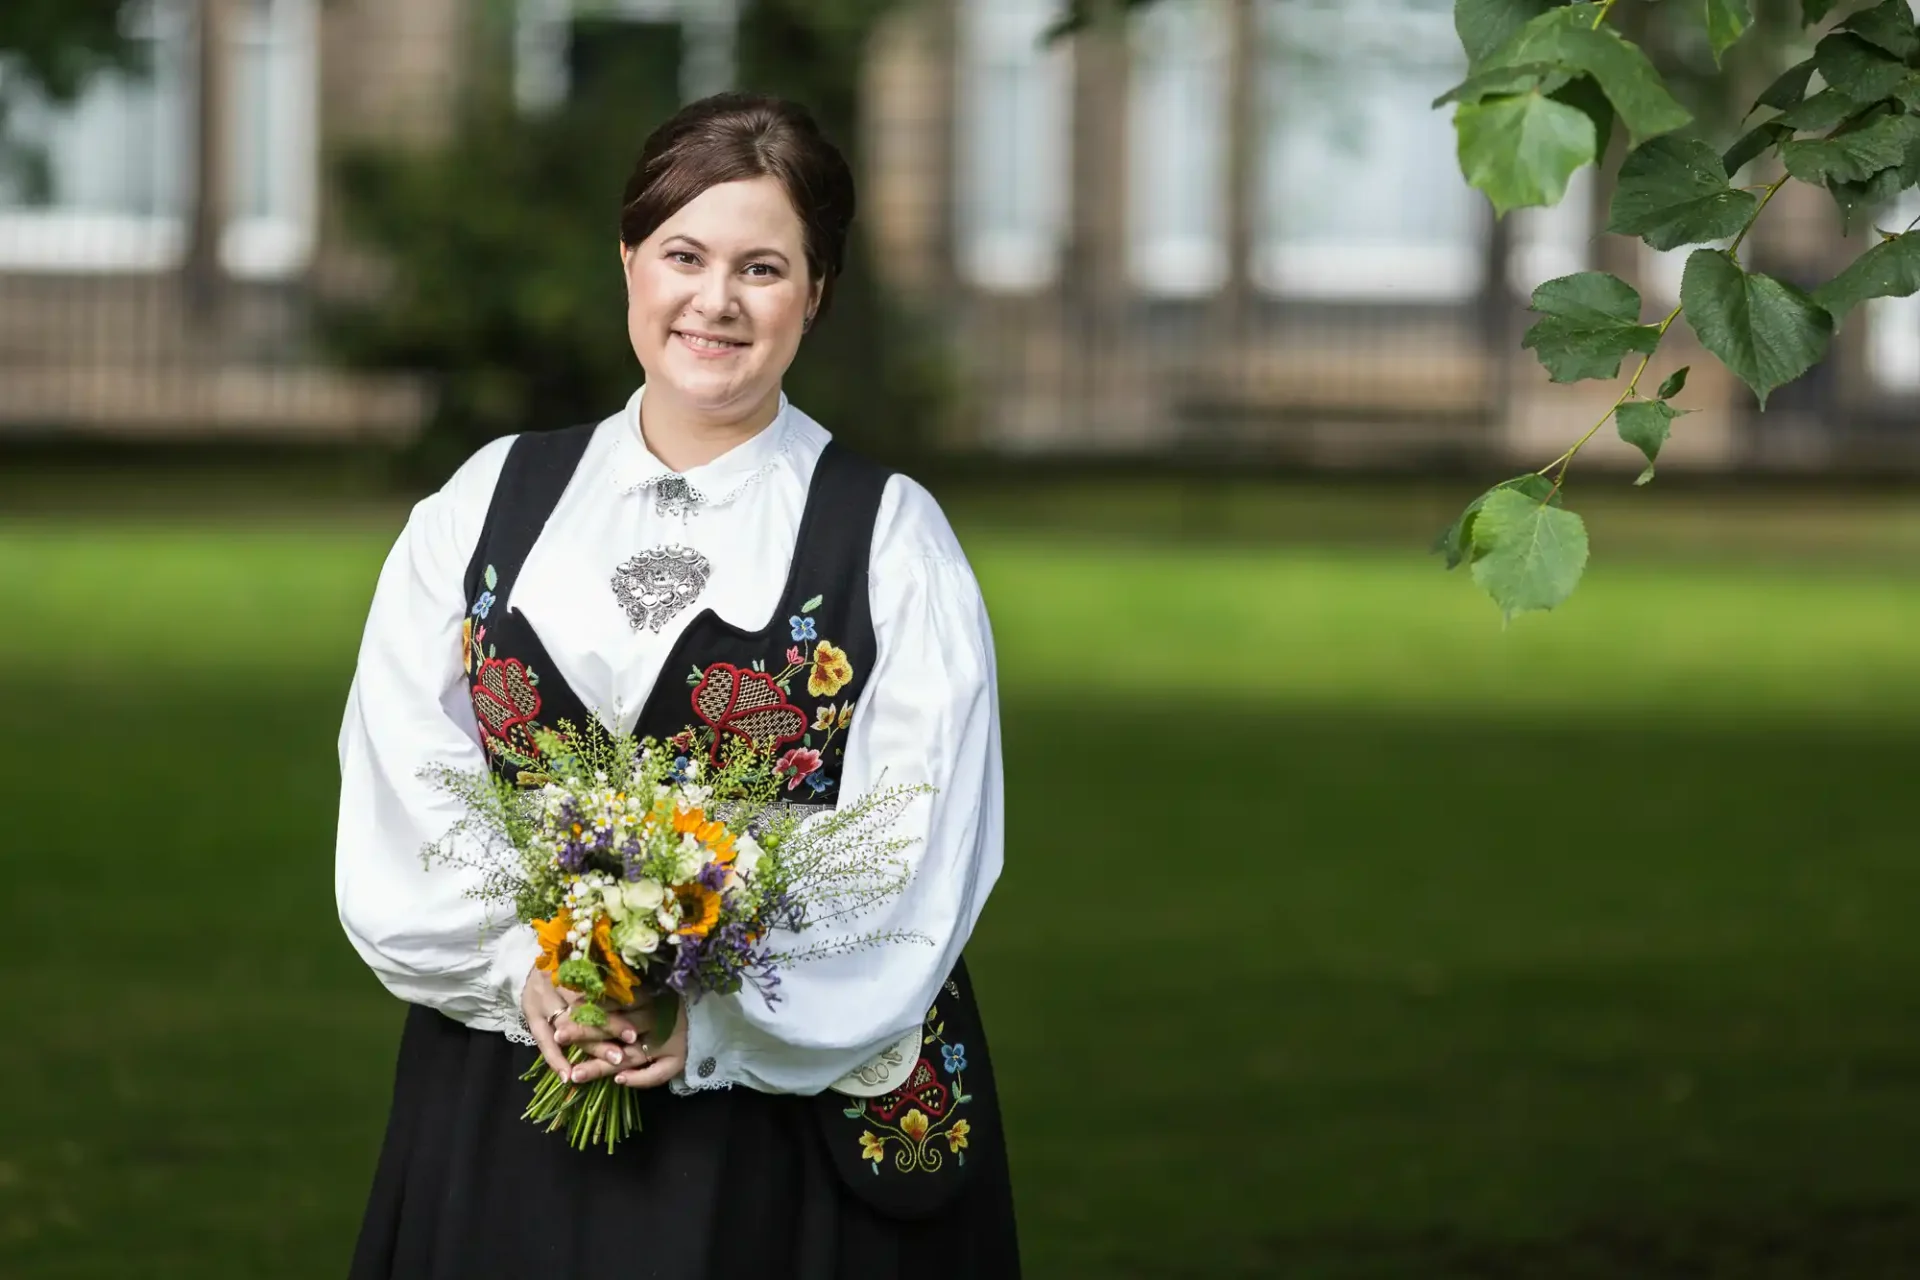 A woman in a traditional norwegian bunad, smiling and holding a bouquet of wildflowers, standing in a park.